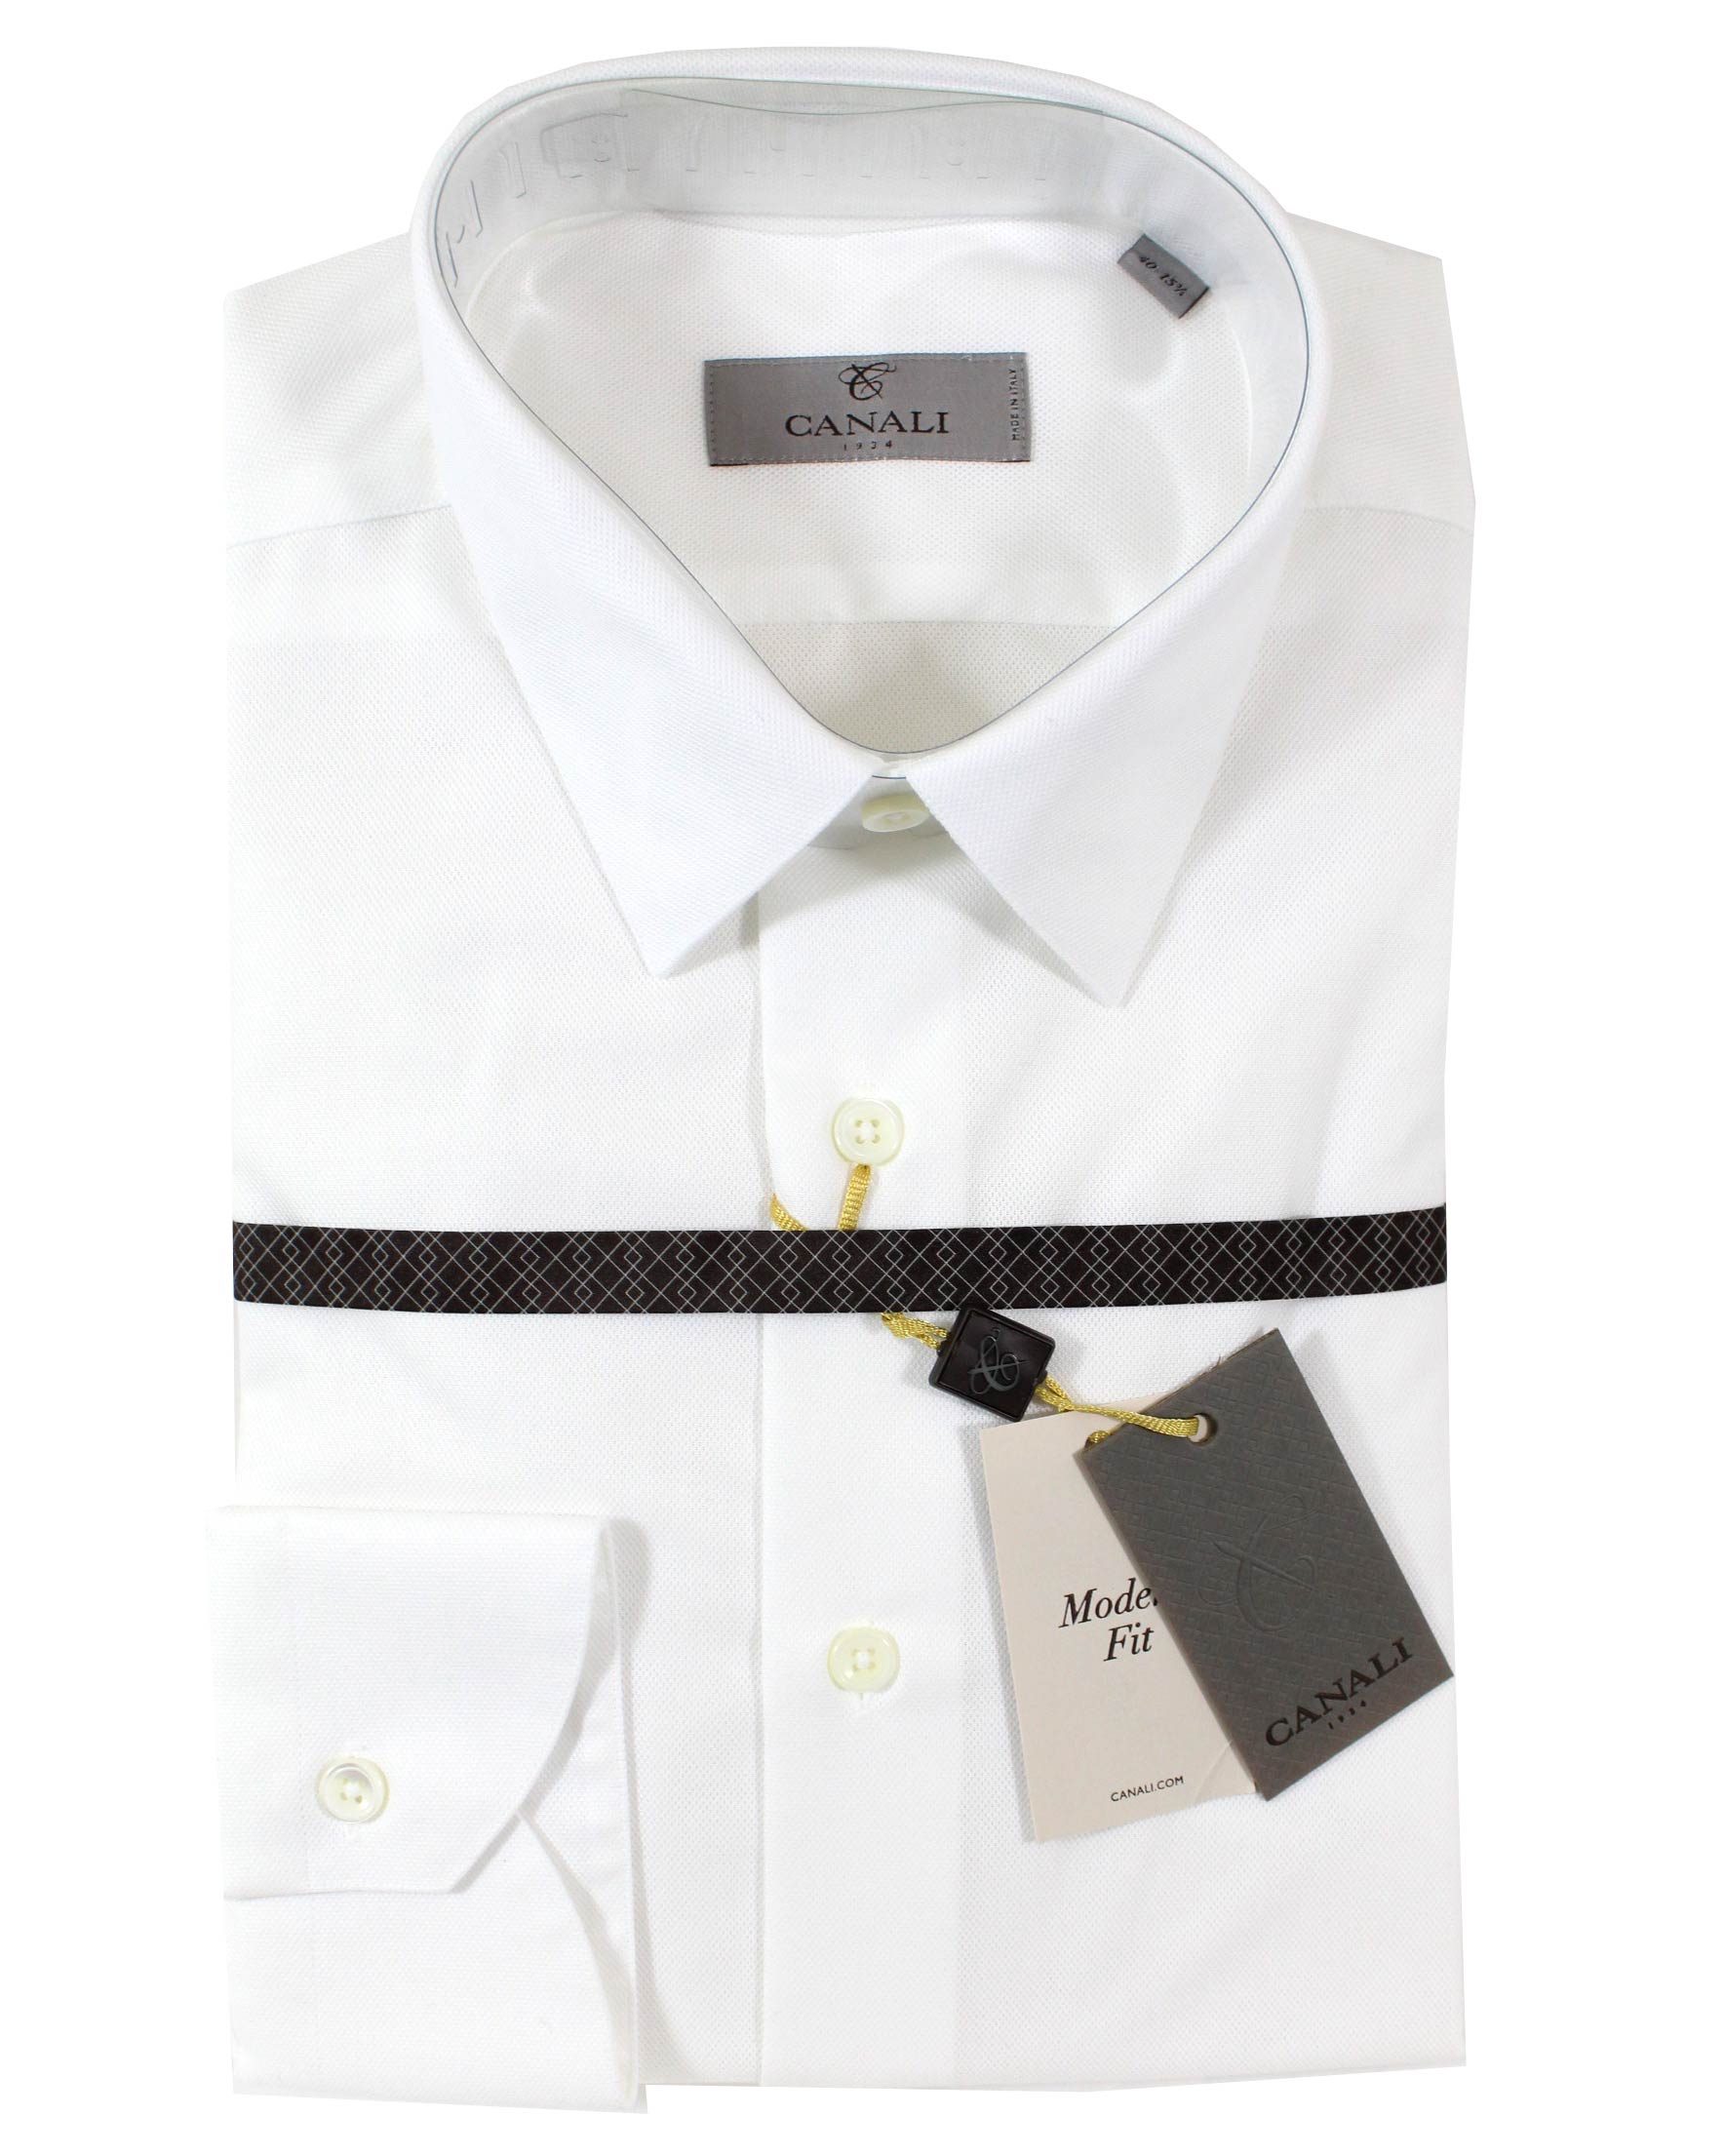 Canali Dress Shirt White 40 - 15 3/4 Pointed Collar